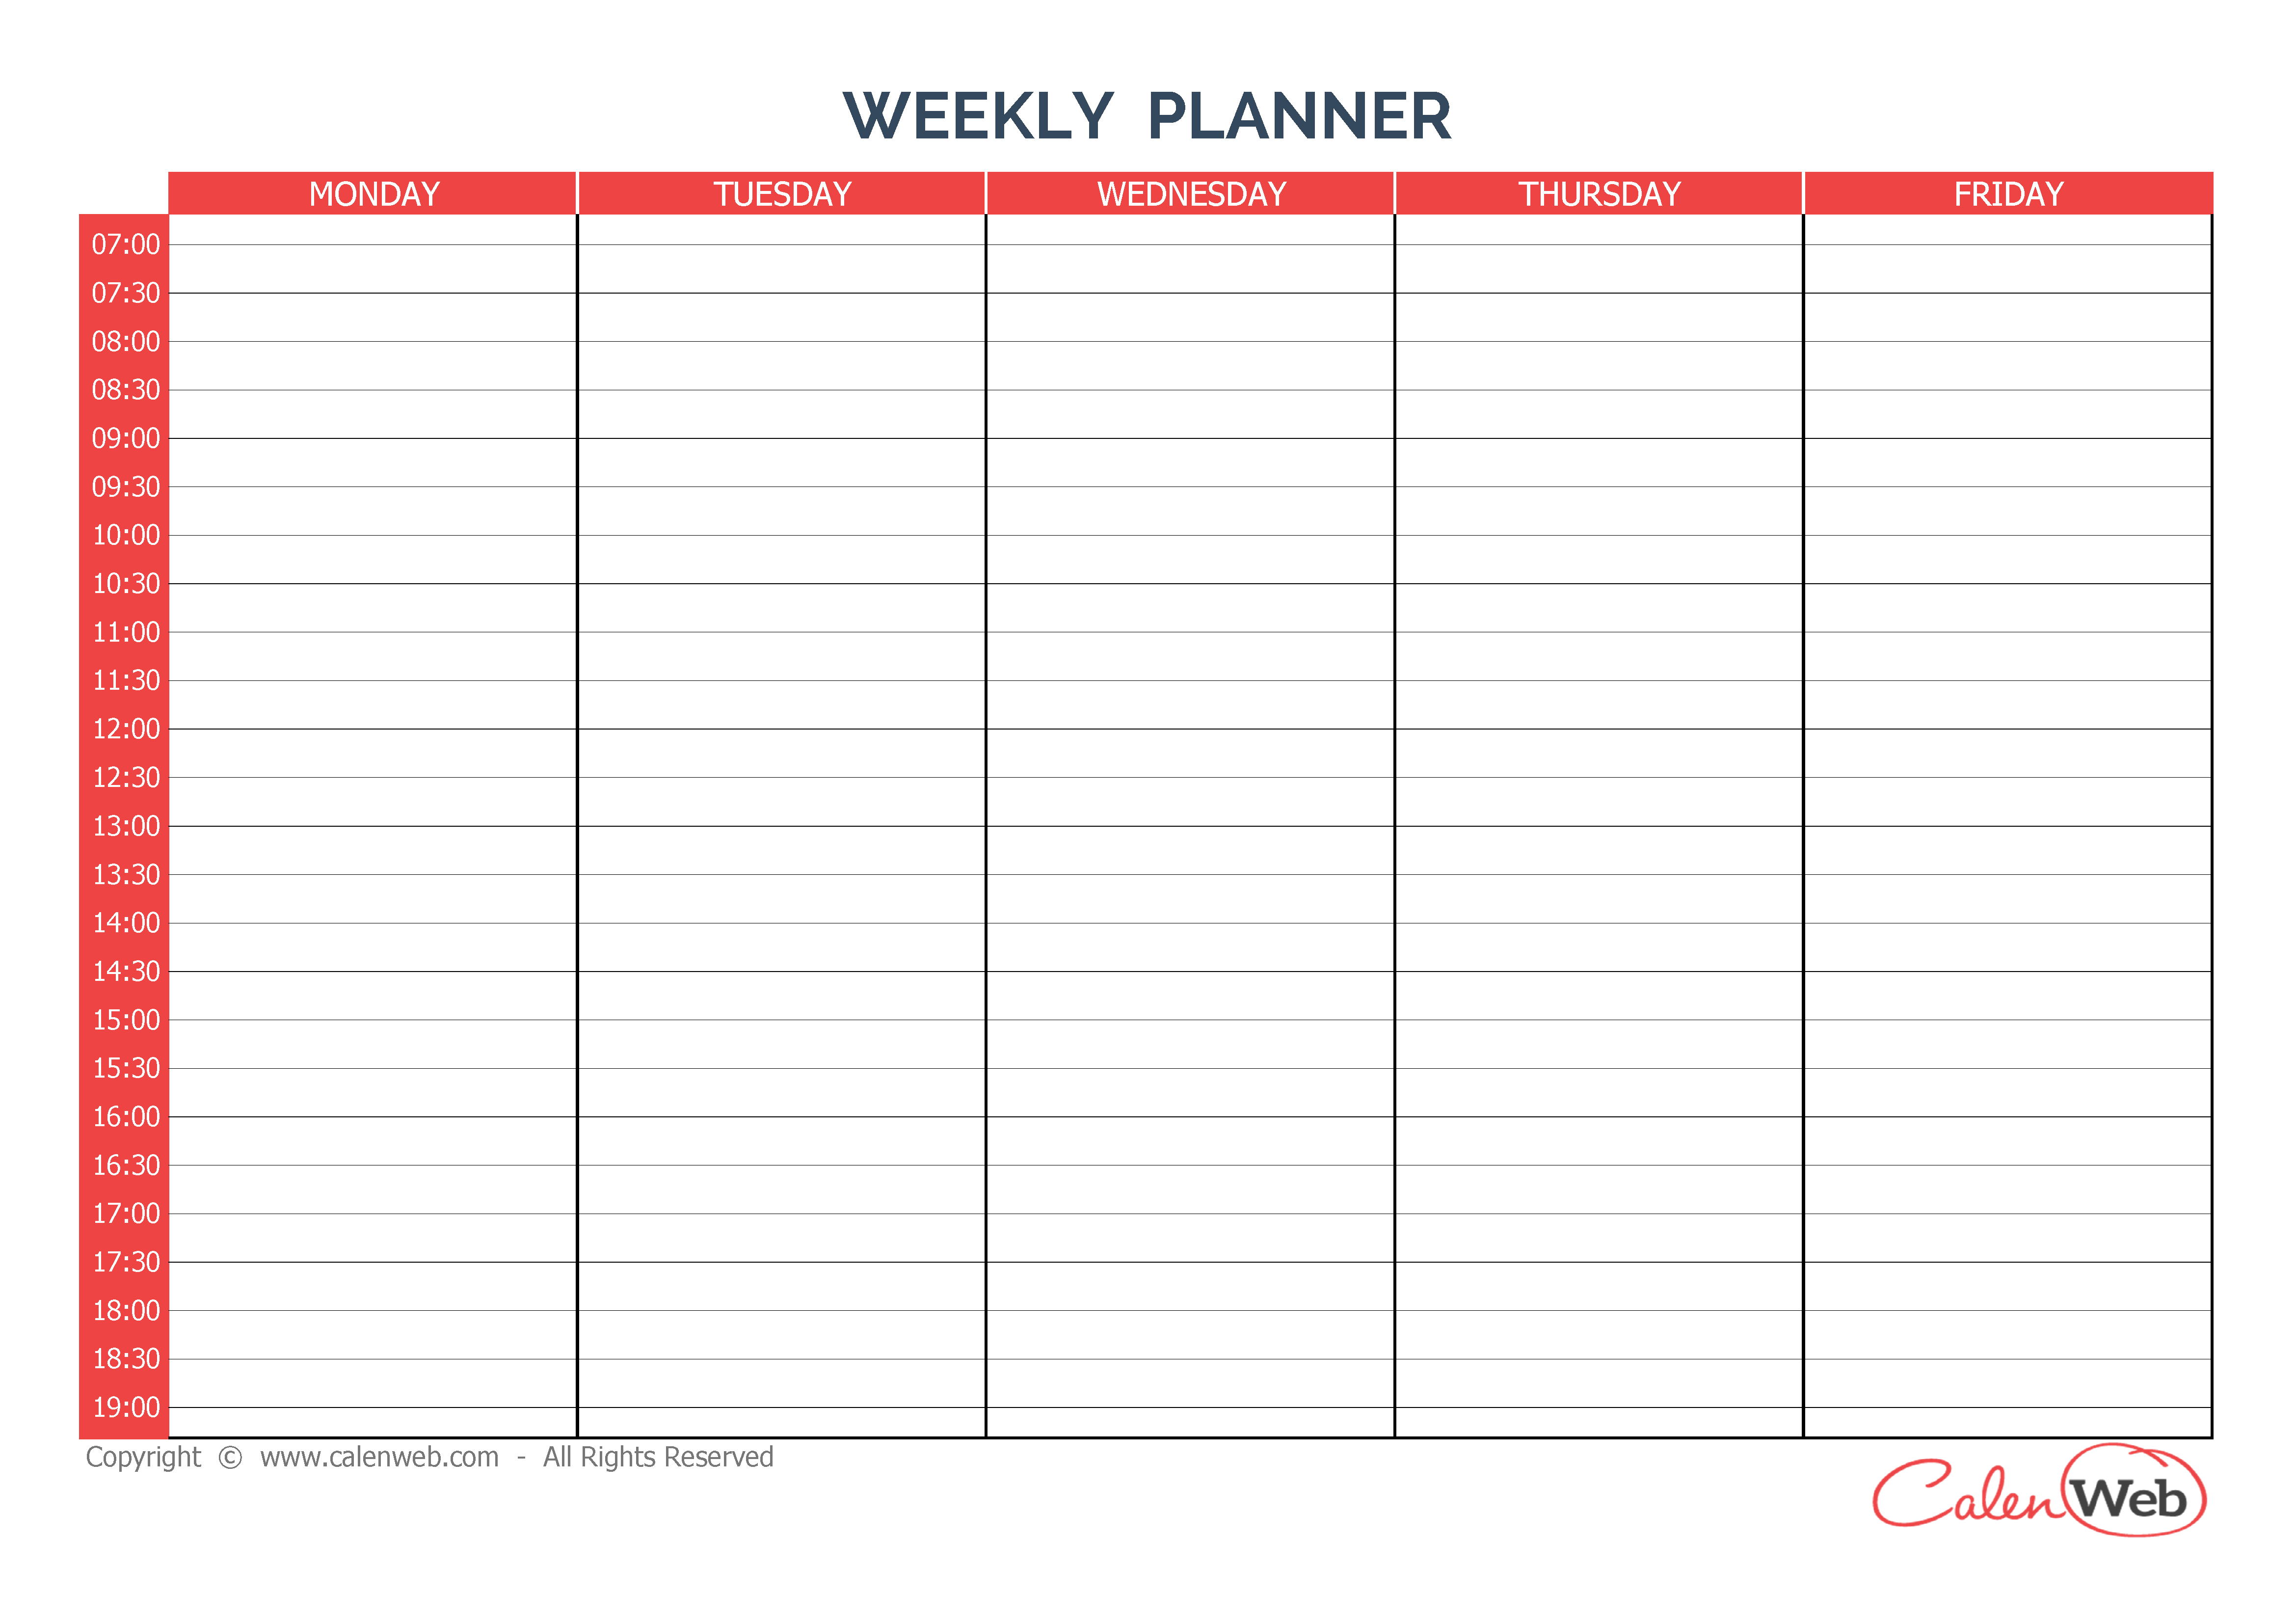 Weekly Planner 5 Days A Week Of 5 Days  Calenweb throughout Printable 5 Day Calendar